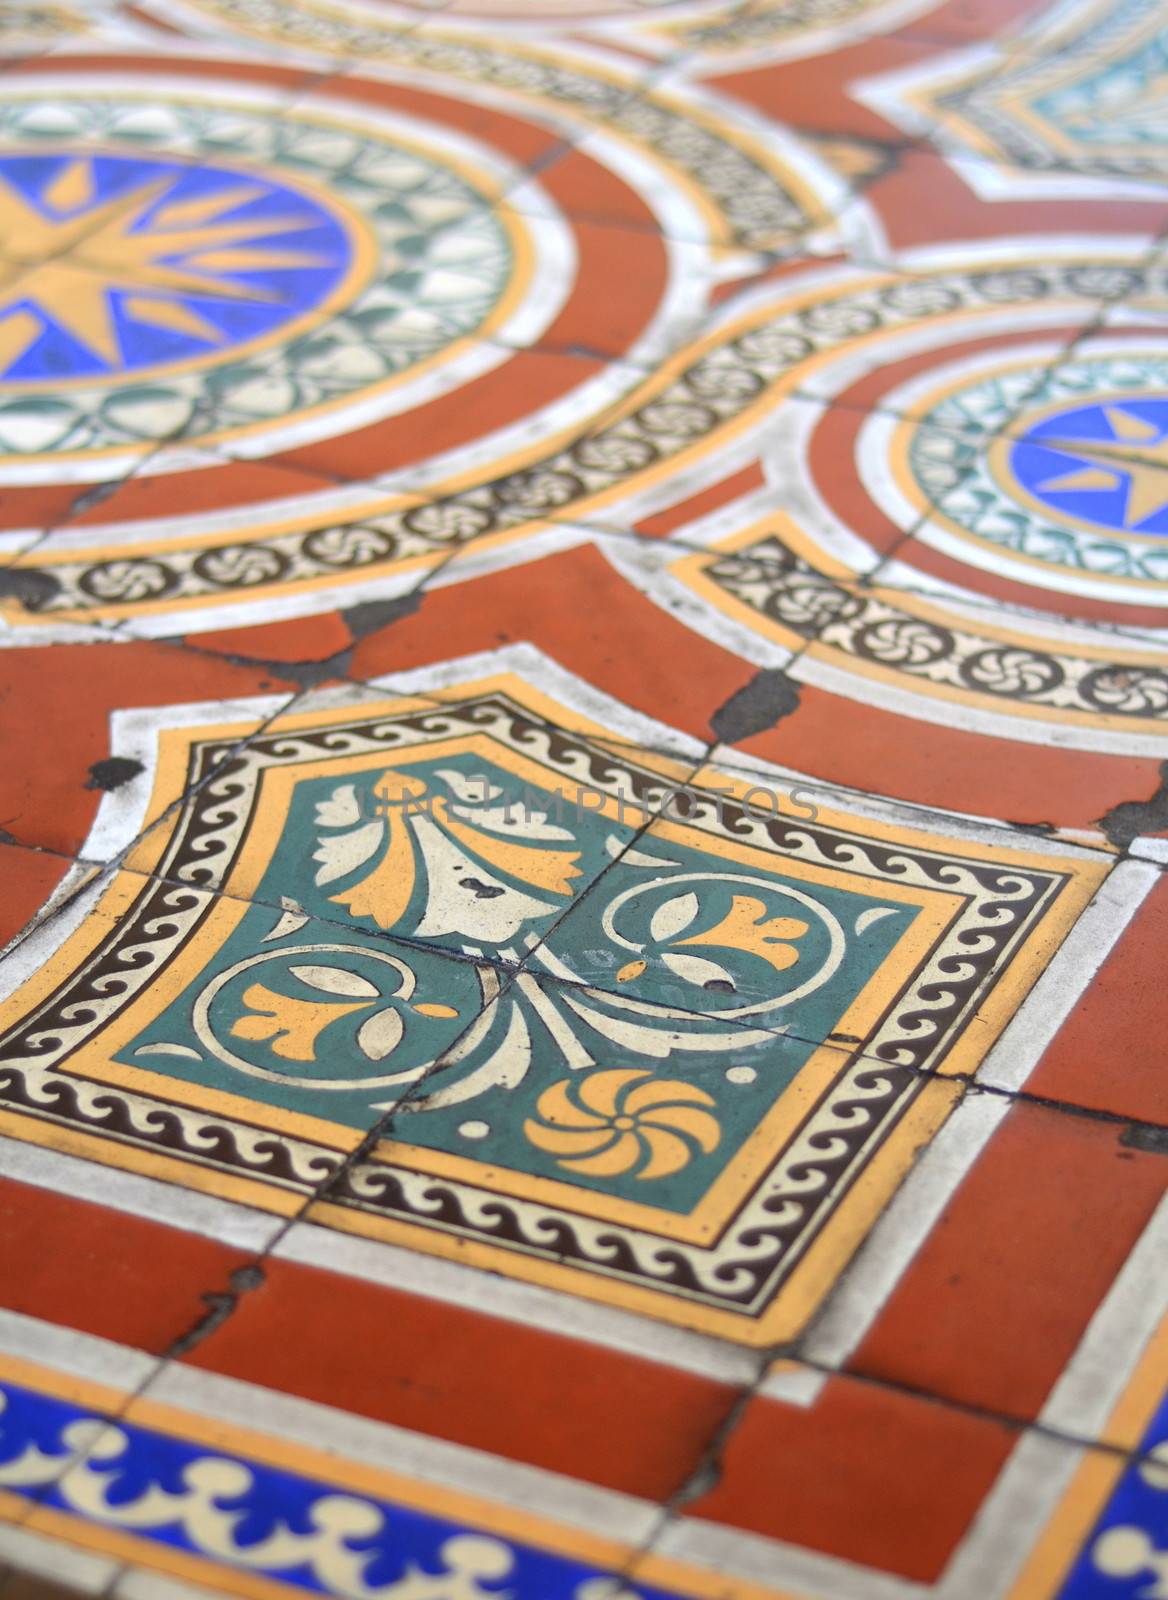 Ancient Ornate Floor Tiles With Shallow Depth Of Focus